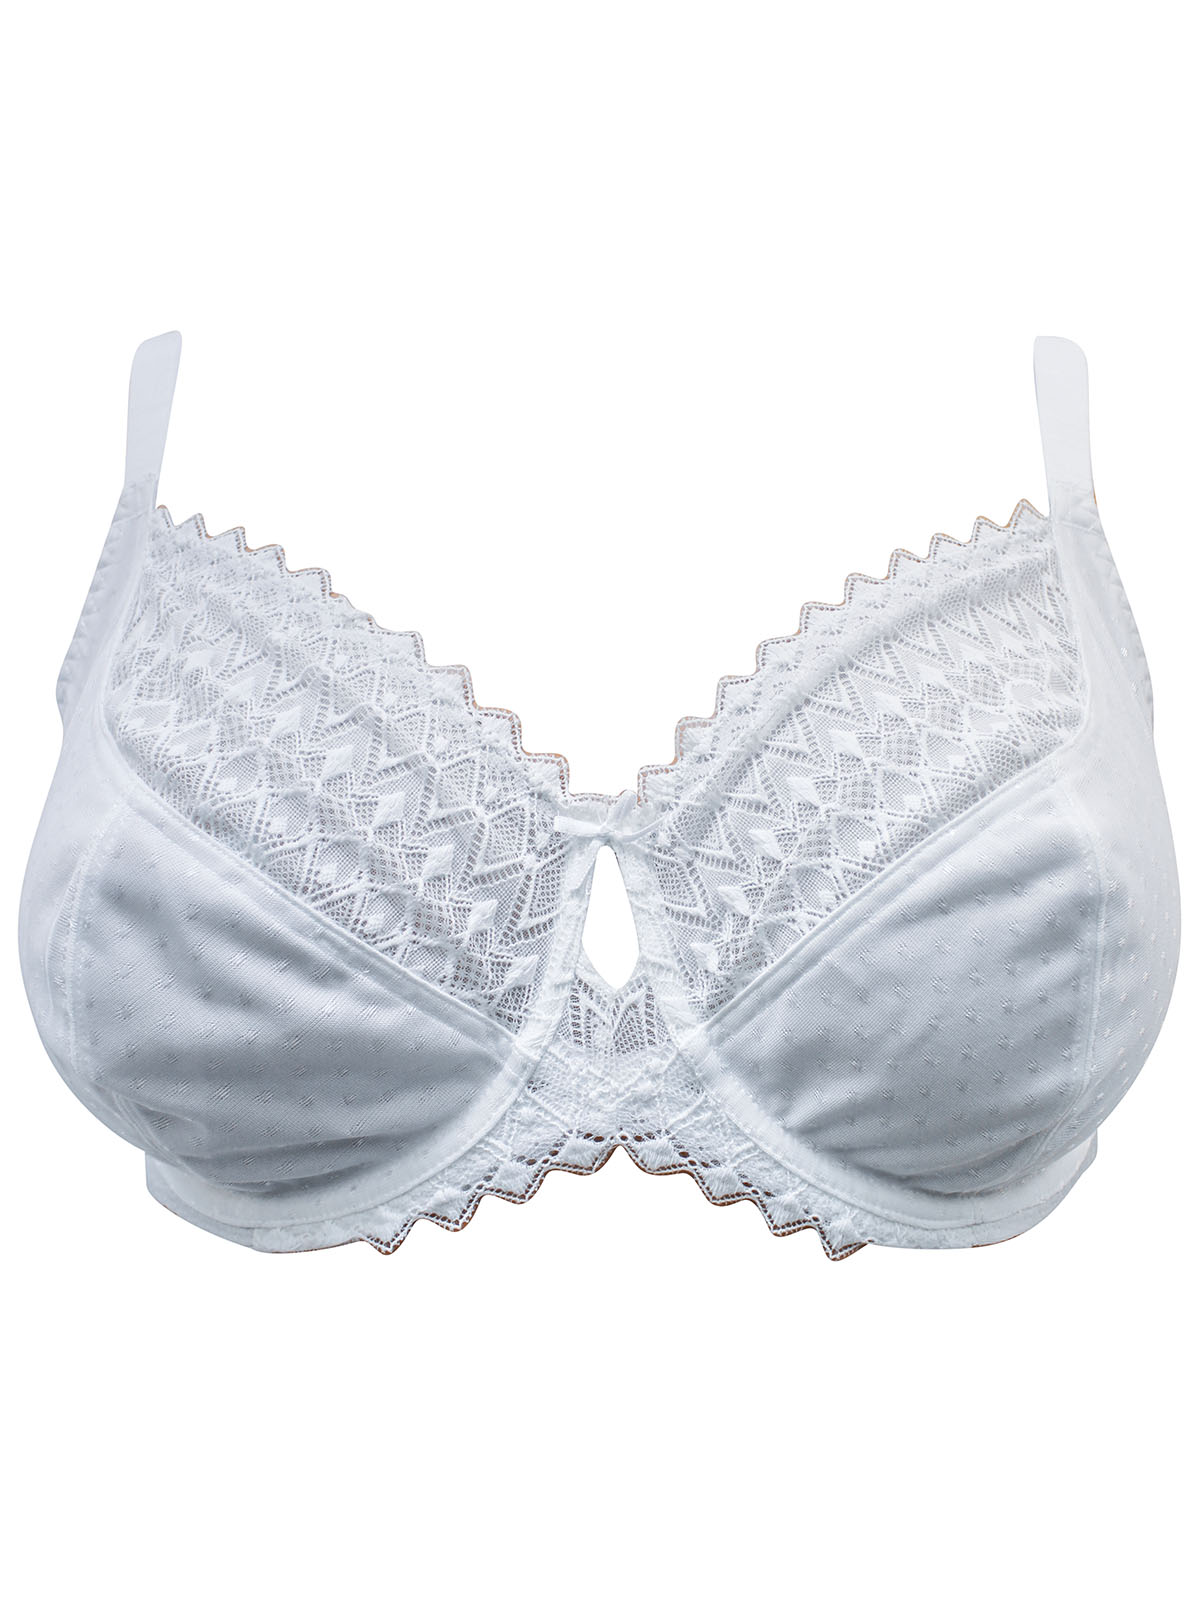 George - - G3ORGE WHITE Lace Underwired Non-Padded Bra - Size 36 (C-G)